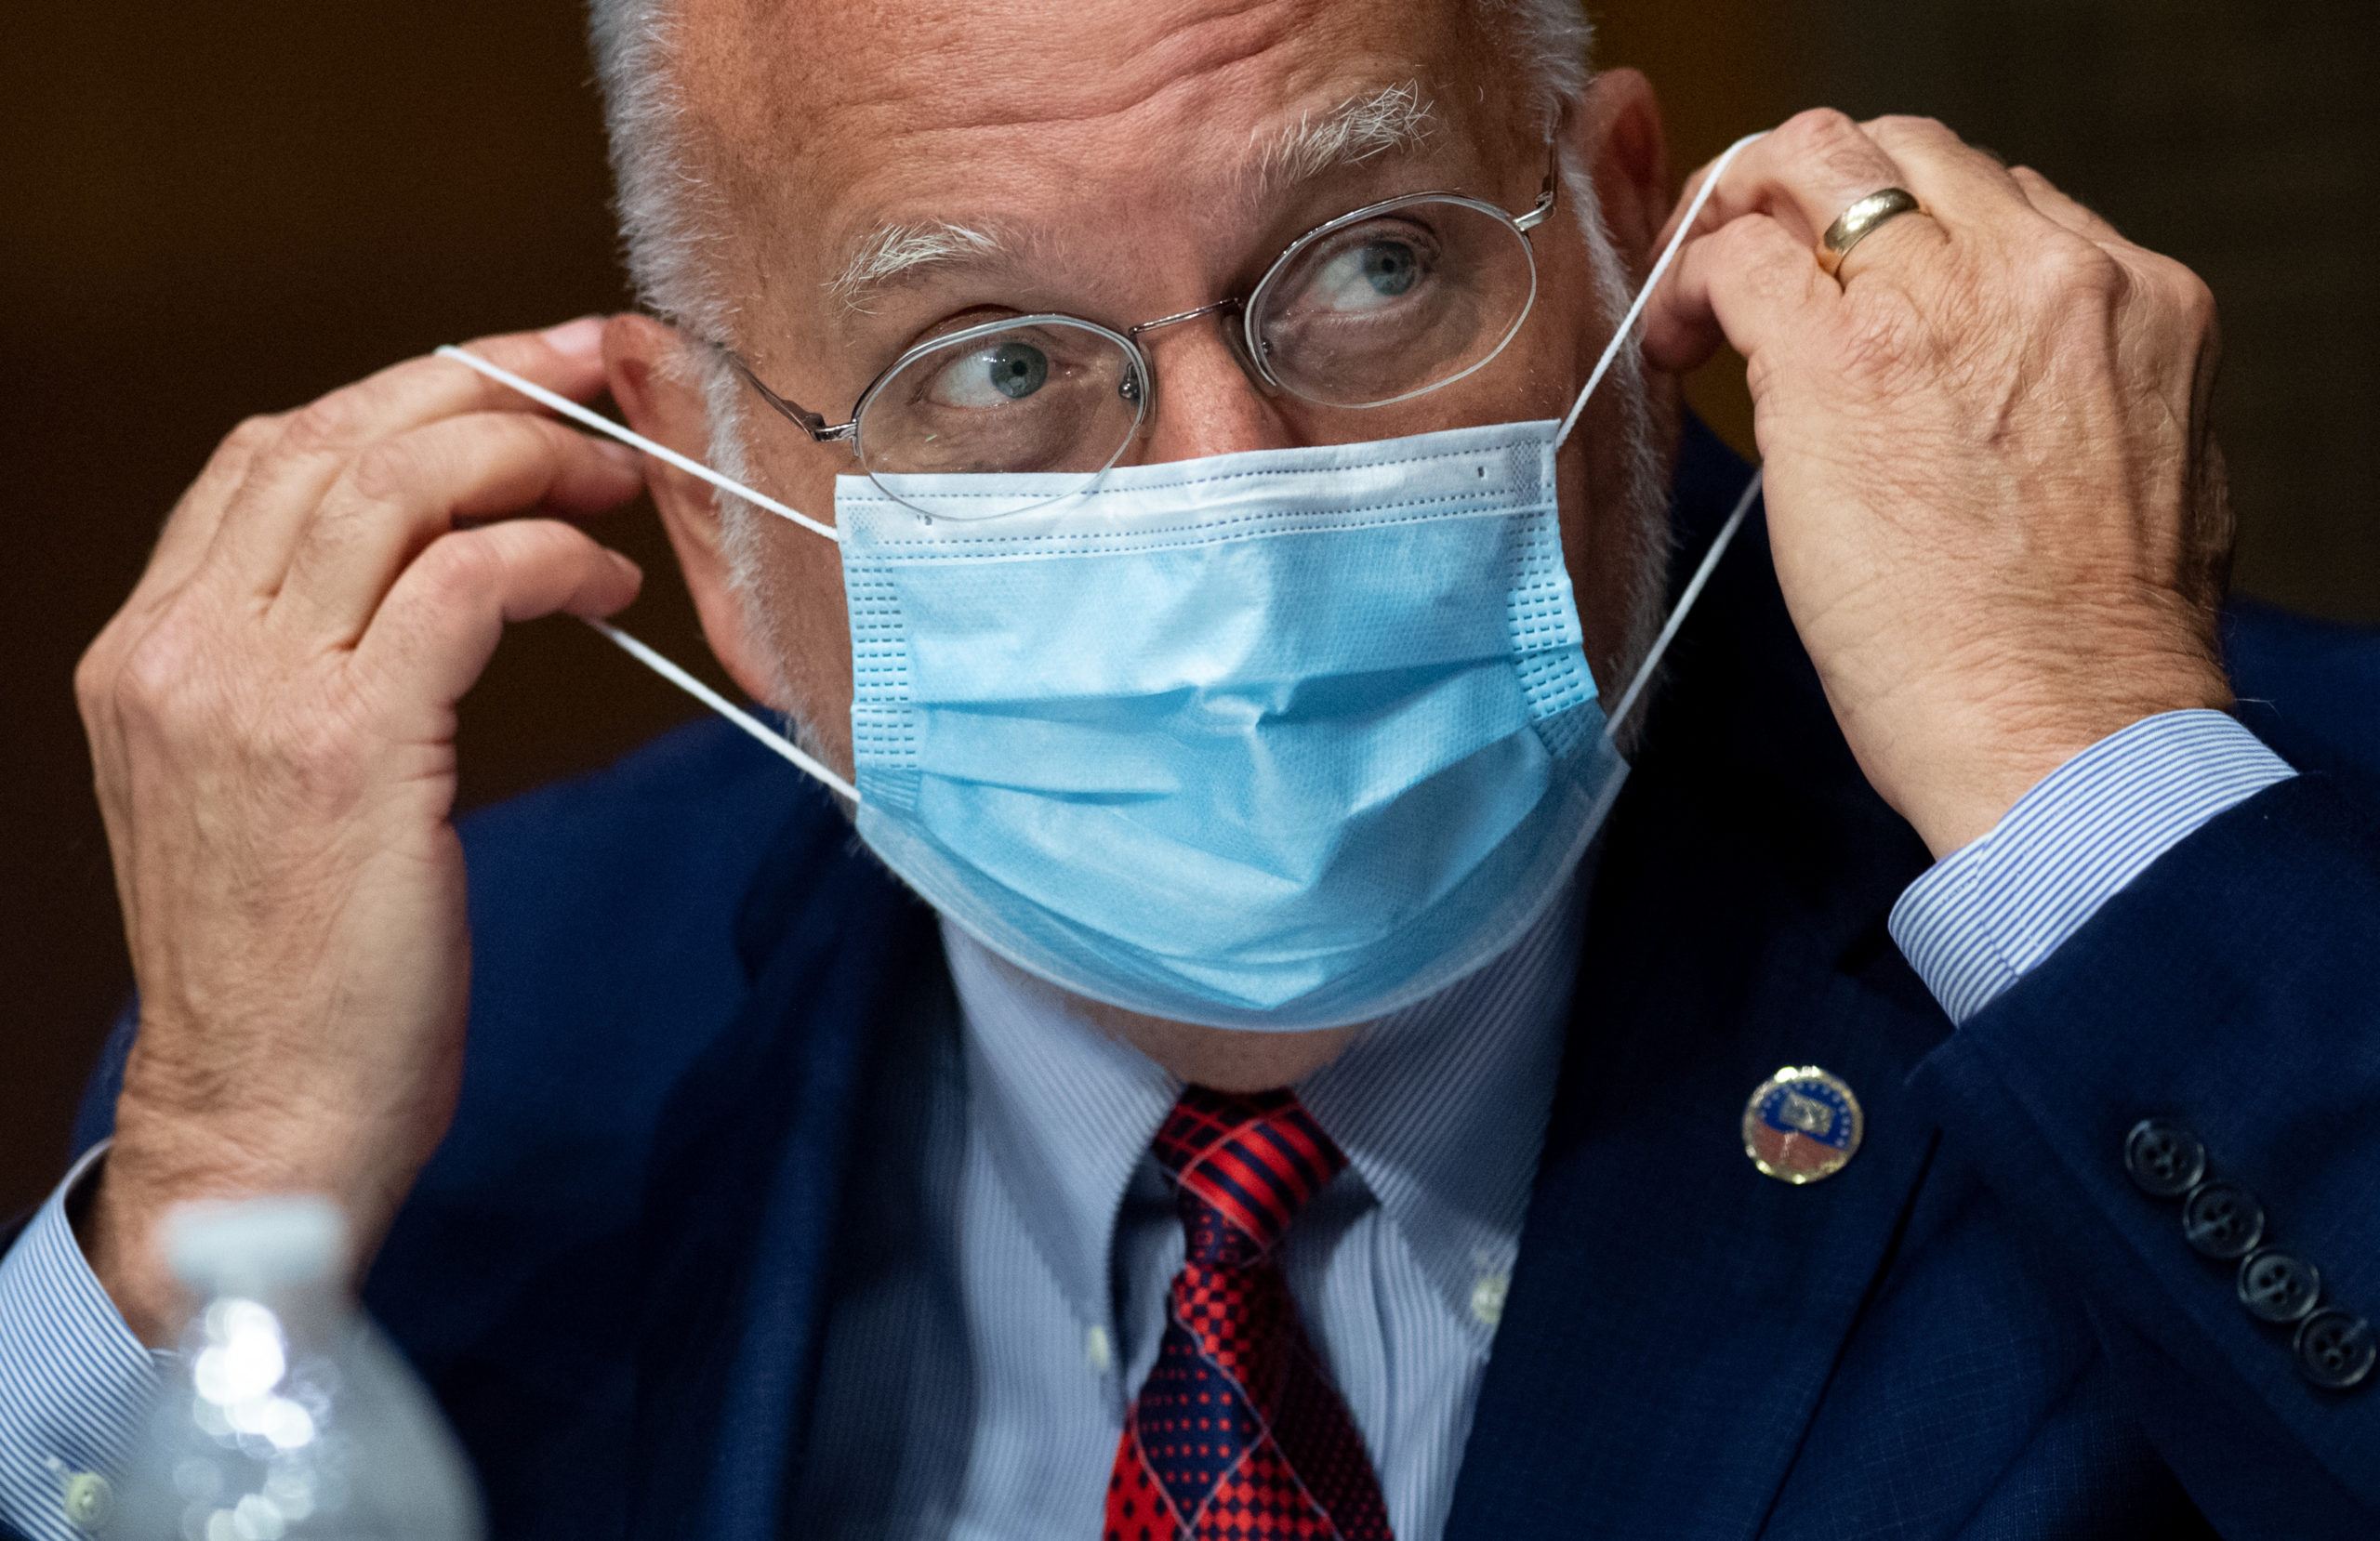 CDC Director Dr. Robert Redfield testifies during a Senate hearing on July 2, in Washington, D.C. (Saul Loeb/Pool/Getty Images)